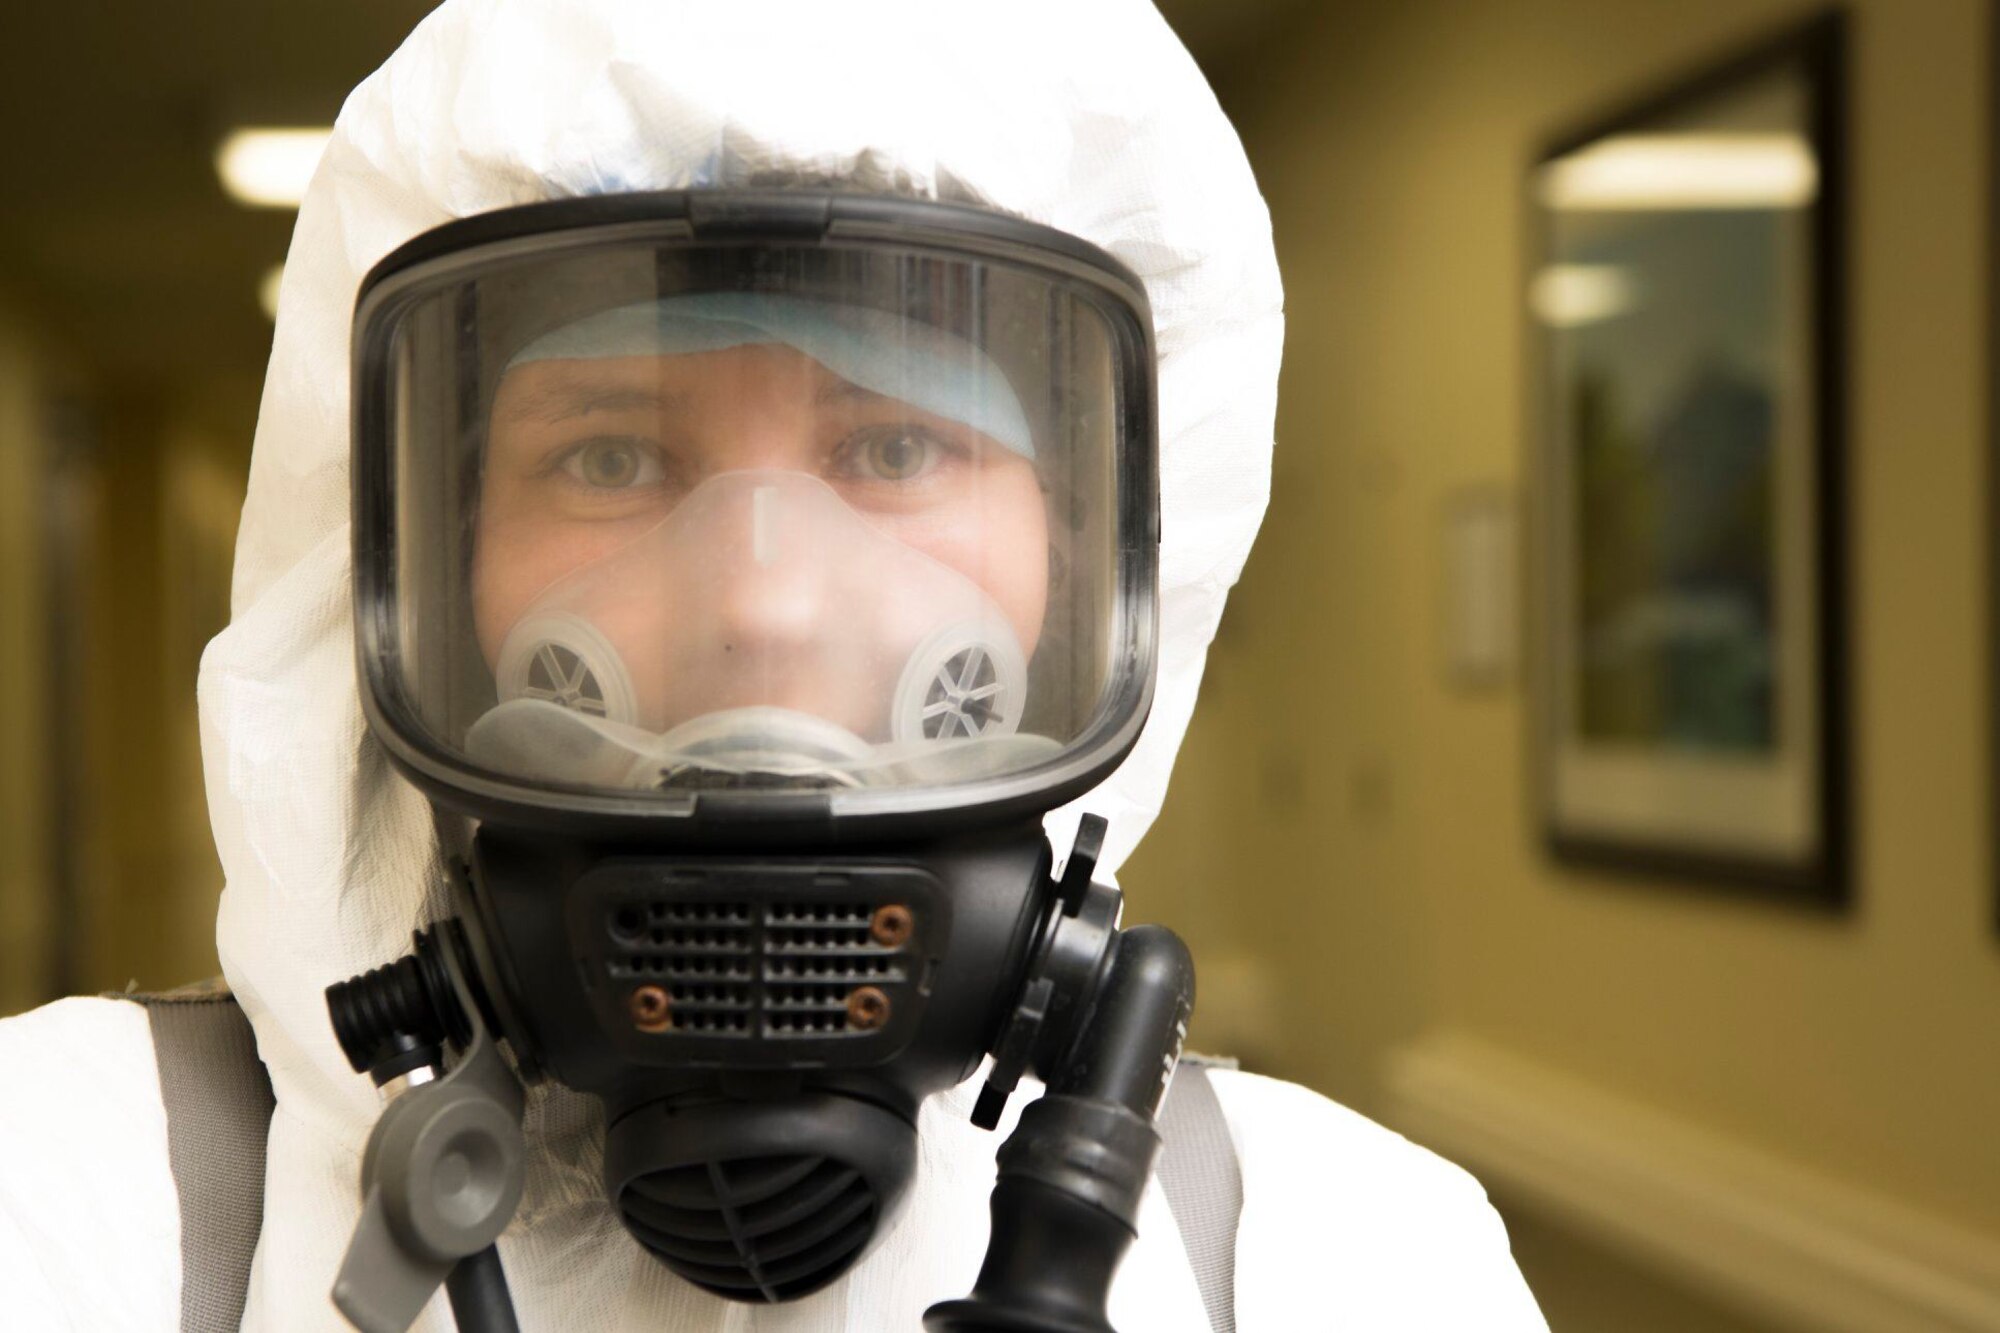 A woman wearing a personal protective suit and gas mask looks at the camera